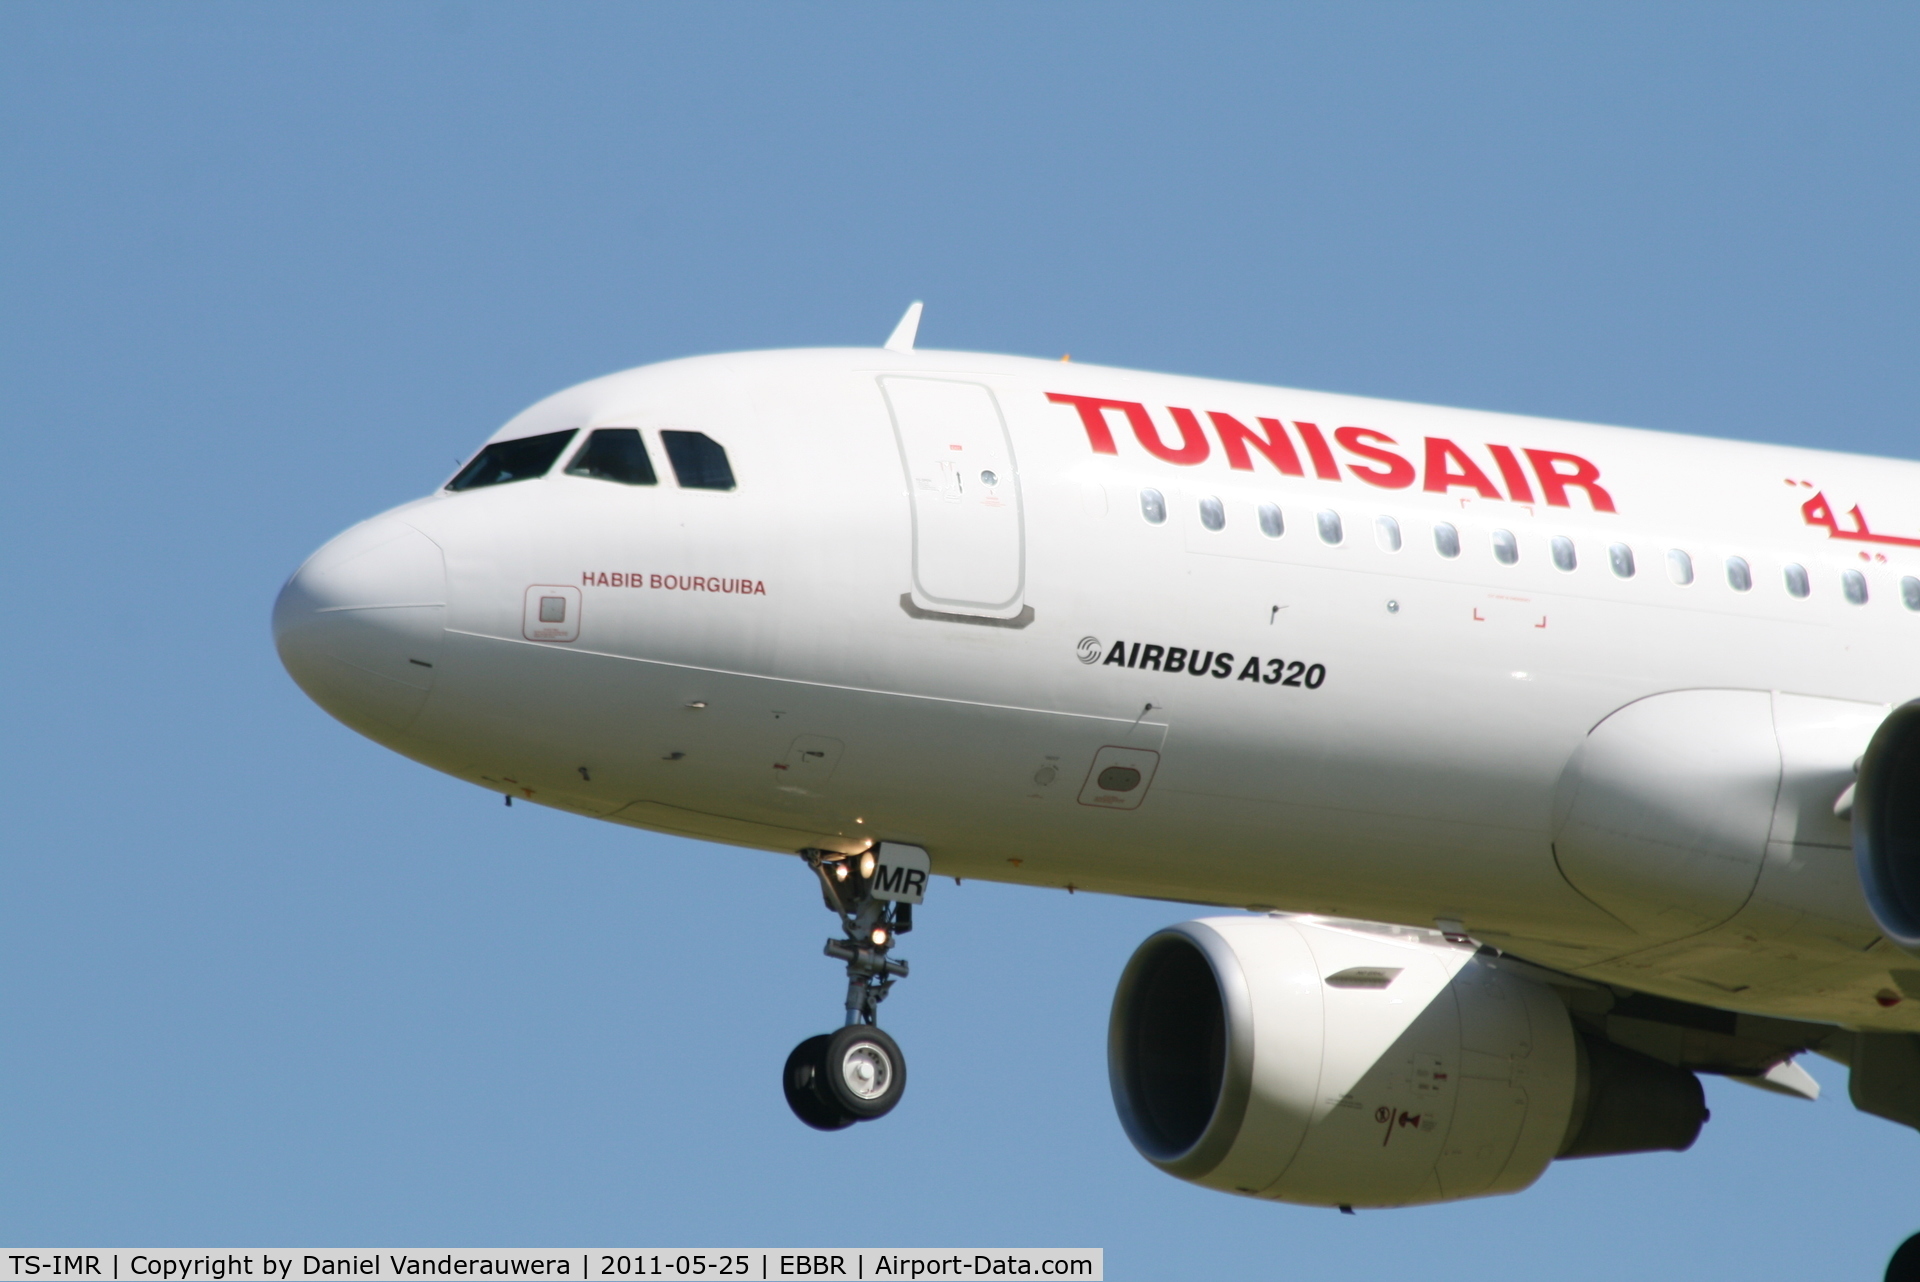 TS-IMR, 2010 Airbus A320-214 C/N 4344, Arrival to RWY 25L